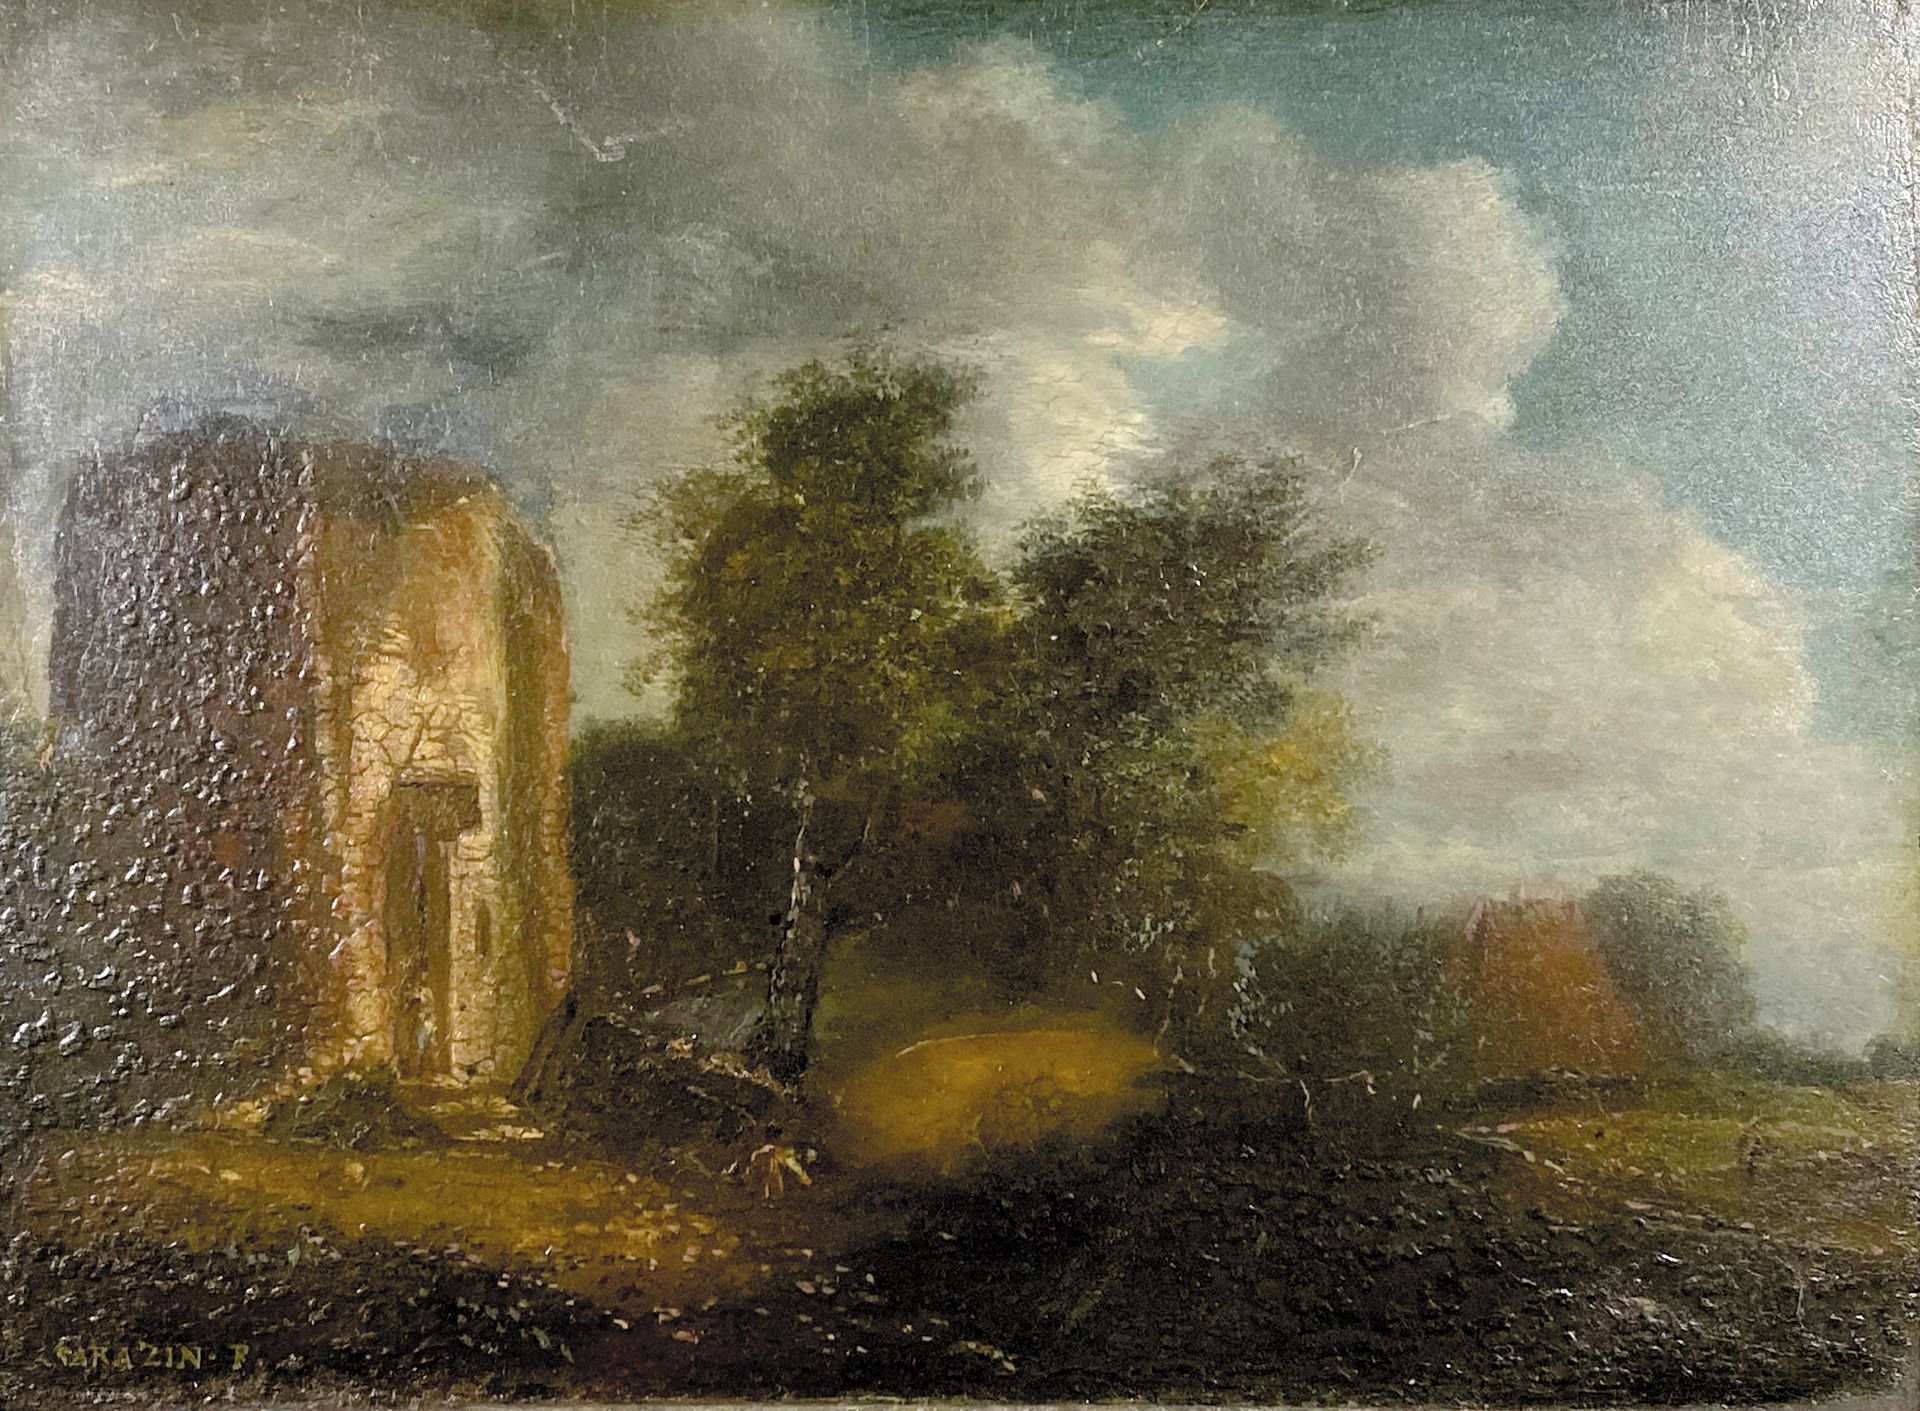 Null Jean-Baptiste SARAZIN (18th-19th centuries)

Landscape with ruined tower. 
&hellip;